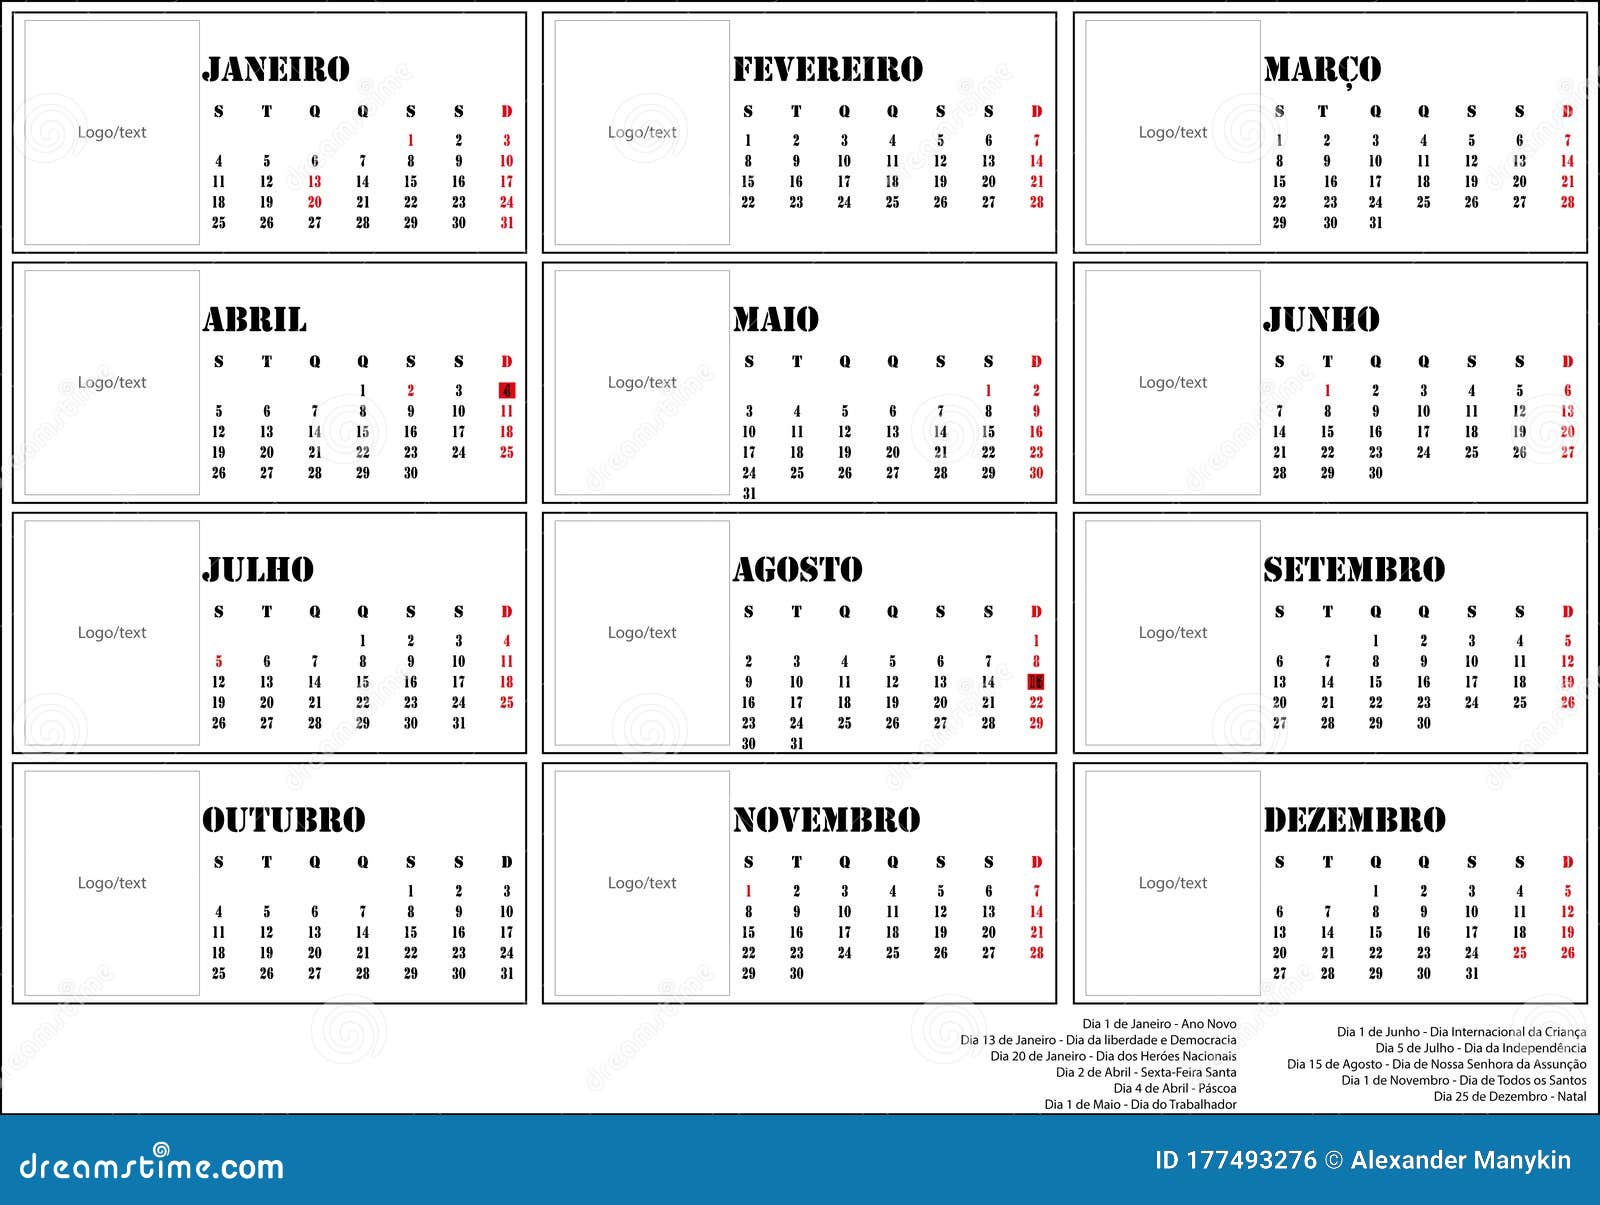 simple calendar for 2021 cape verde, in portuguese, with national holidays